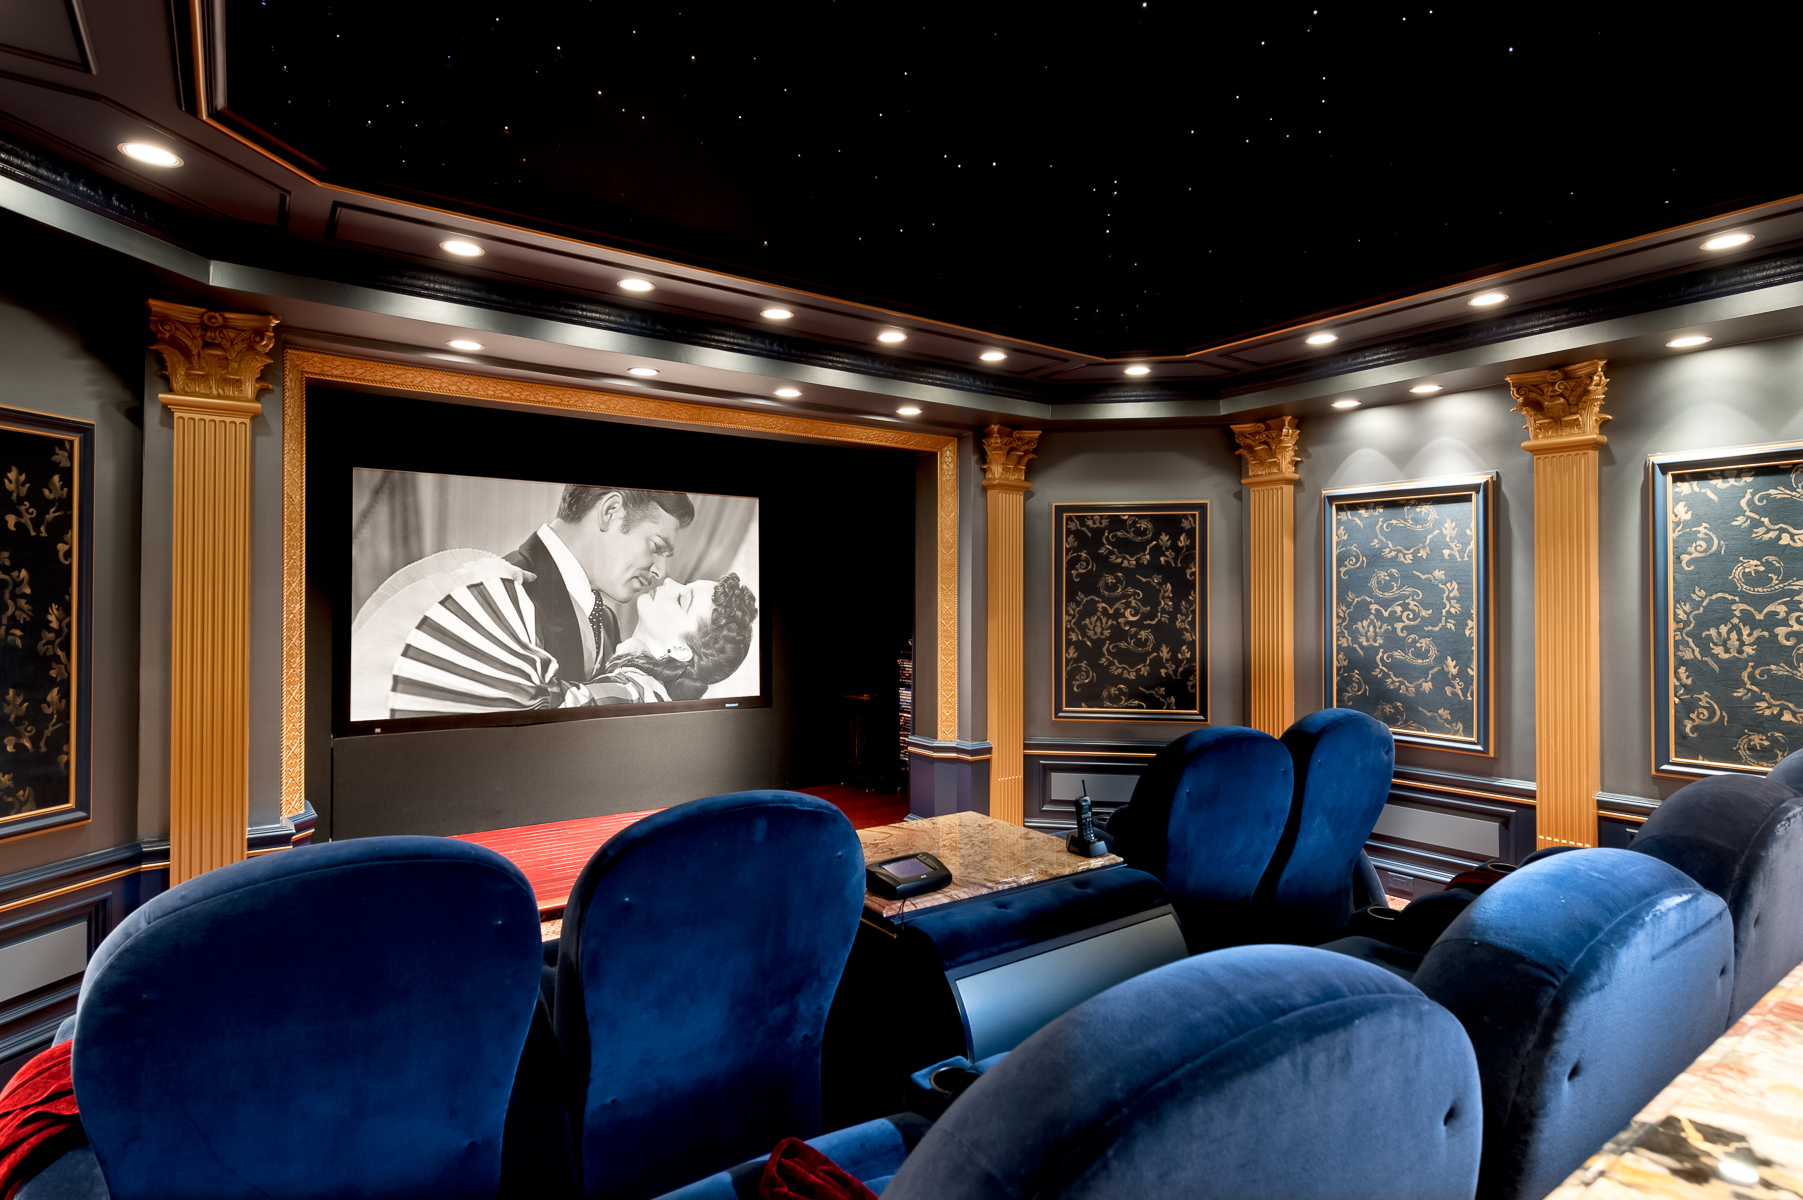 a home theater with blue chairs and a movie screen.